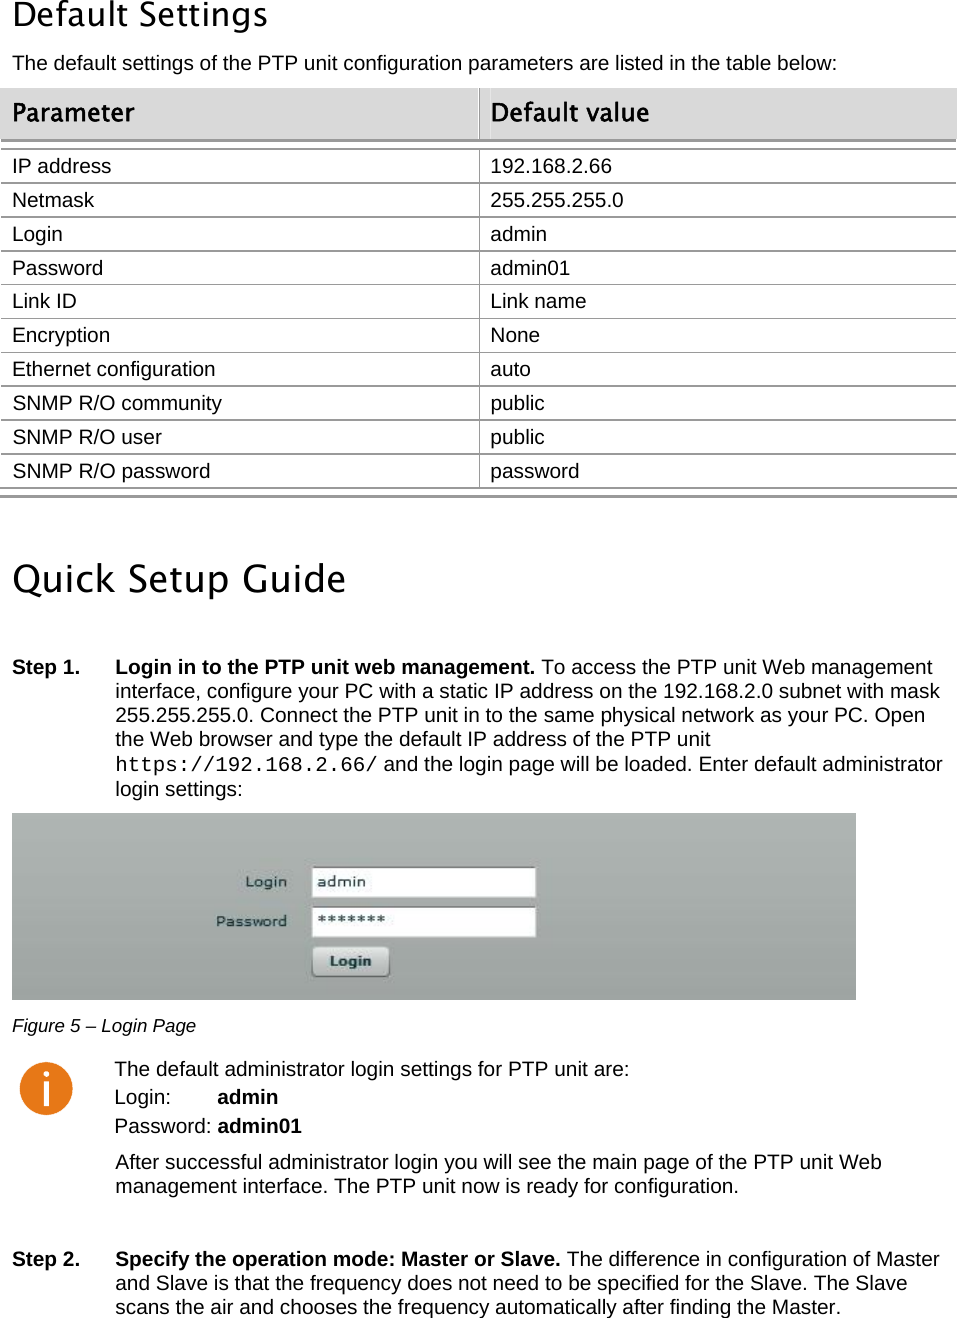  LigoWave Page 11   Default Settings The default settings of the PTP unit configuration parameters are listed in the table below: Parameter  Default value IP address  192.168.2.66 Netmask 255.255.255.0 Login admin Password admin01 Link ID  Link name Encryption None Ethernet configuration  auto SNMP R/O community  public SNMP R/O user  public SNMP R/O password  password  Quick Setup Guide  Step 1.  Login in to the PTP unit web management. To access the PTP unit Web management interface, configure your PC with a static IP address on the 192.168.2.0 subnet with mask 255.255.255.0. Connect the PTP unit in to the same physical network as your PC. Open the Web browser and type the default IP address of the PTP unit https://192.168.2.66/ and the login page will be loaded. Enter default administrator login settings:  Figure 5 – Login Page  The default administrator login settings for PTP unit are: Login:        admin Password: admin01 After successful administrator login you will see the main page of the PTP unit Web management interface. The PTP unit now is ready for configuration.   Step 2.  Specify the operation mode: Master or Slave. The difference in configuration of Master and Slave is that the frequency does not need to be specified for the Slave. The Slave scans the air and chooses the frequency automatically after finding the Master. 